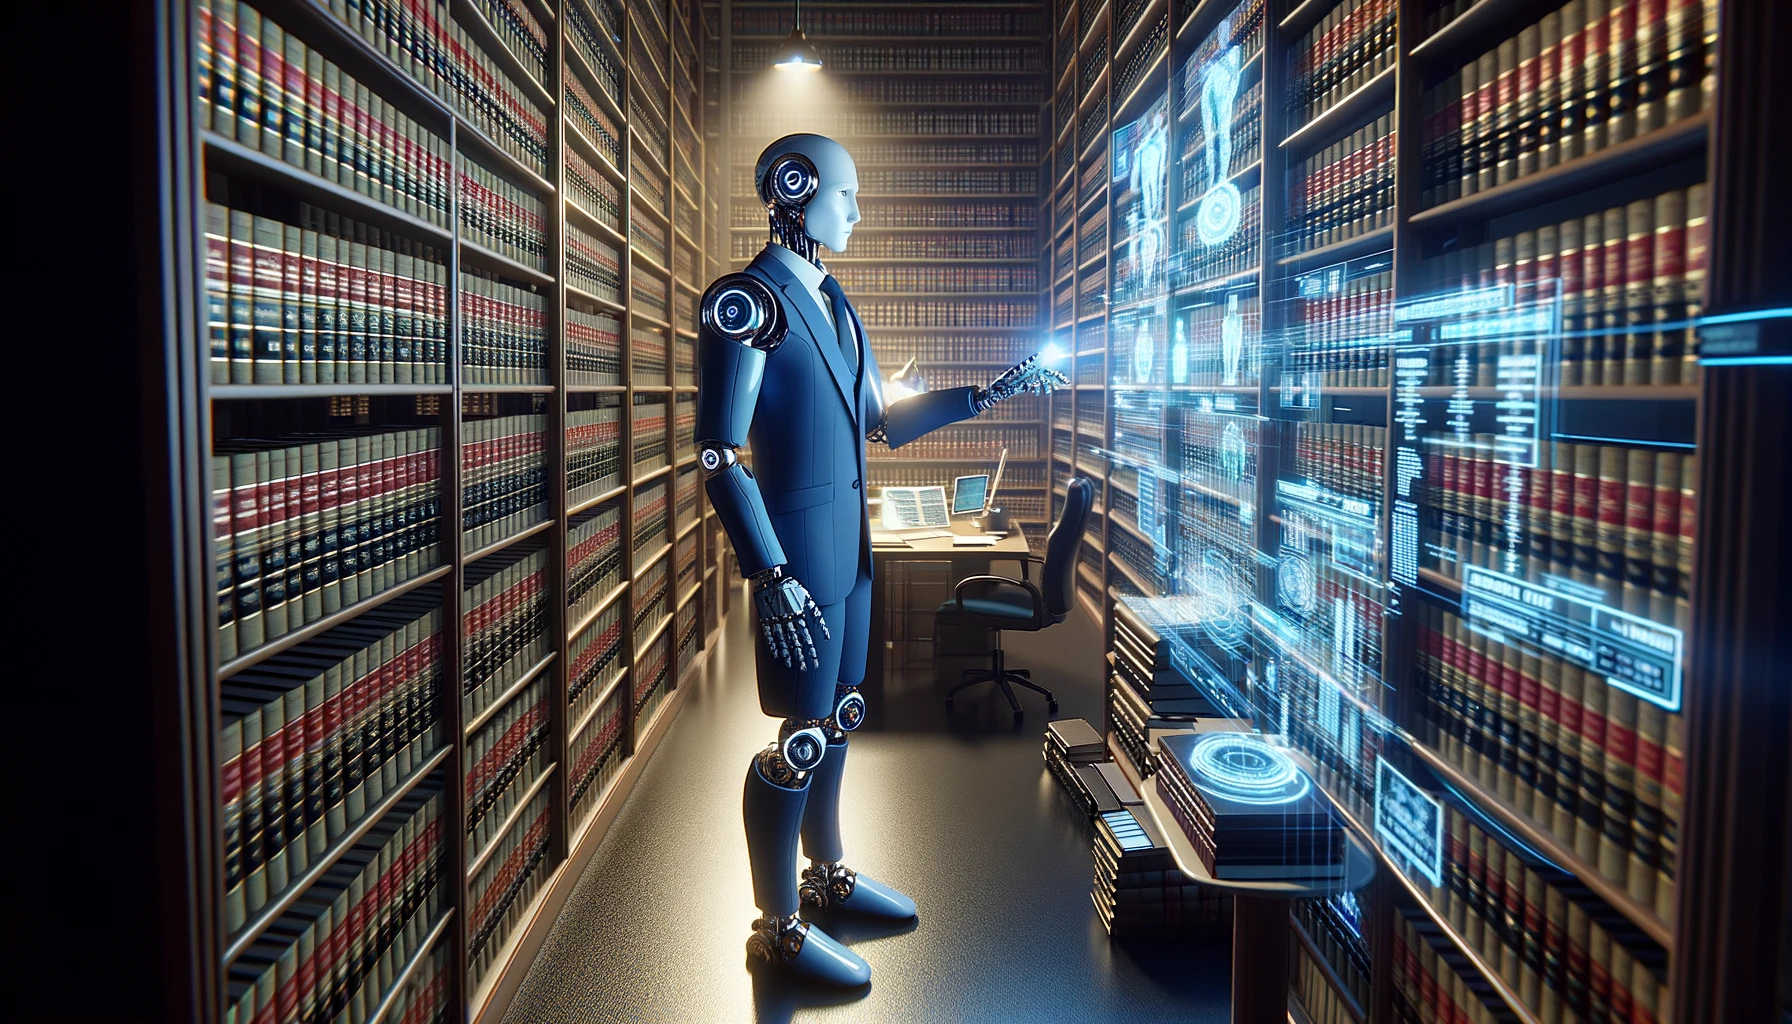 A modern law firm meeting room with humanoid robots and humans working together, surrounded by digital interfaces and holographic data displays. The scene blends traditional legal attire with futuristic technology, showcasing a collaborative and technologically advanced legal environment.